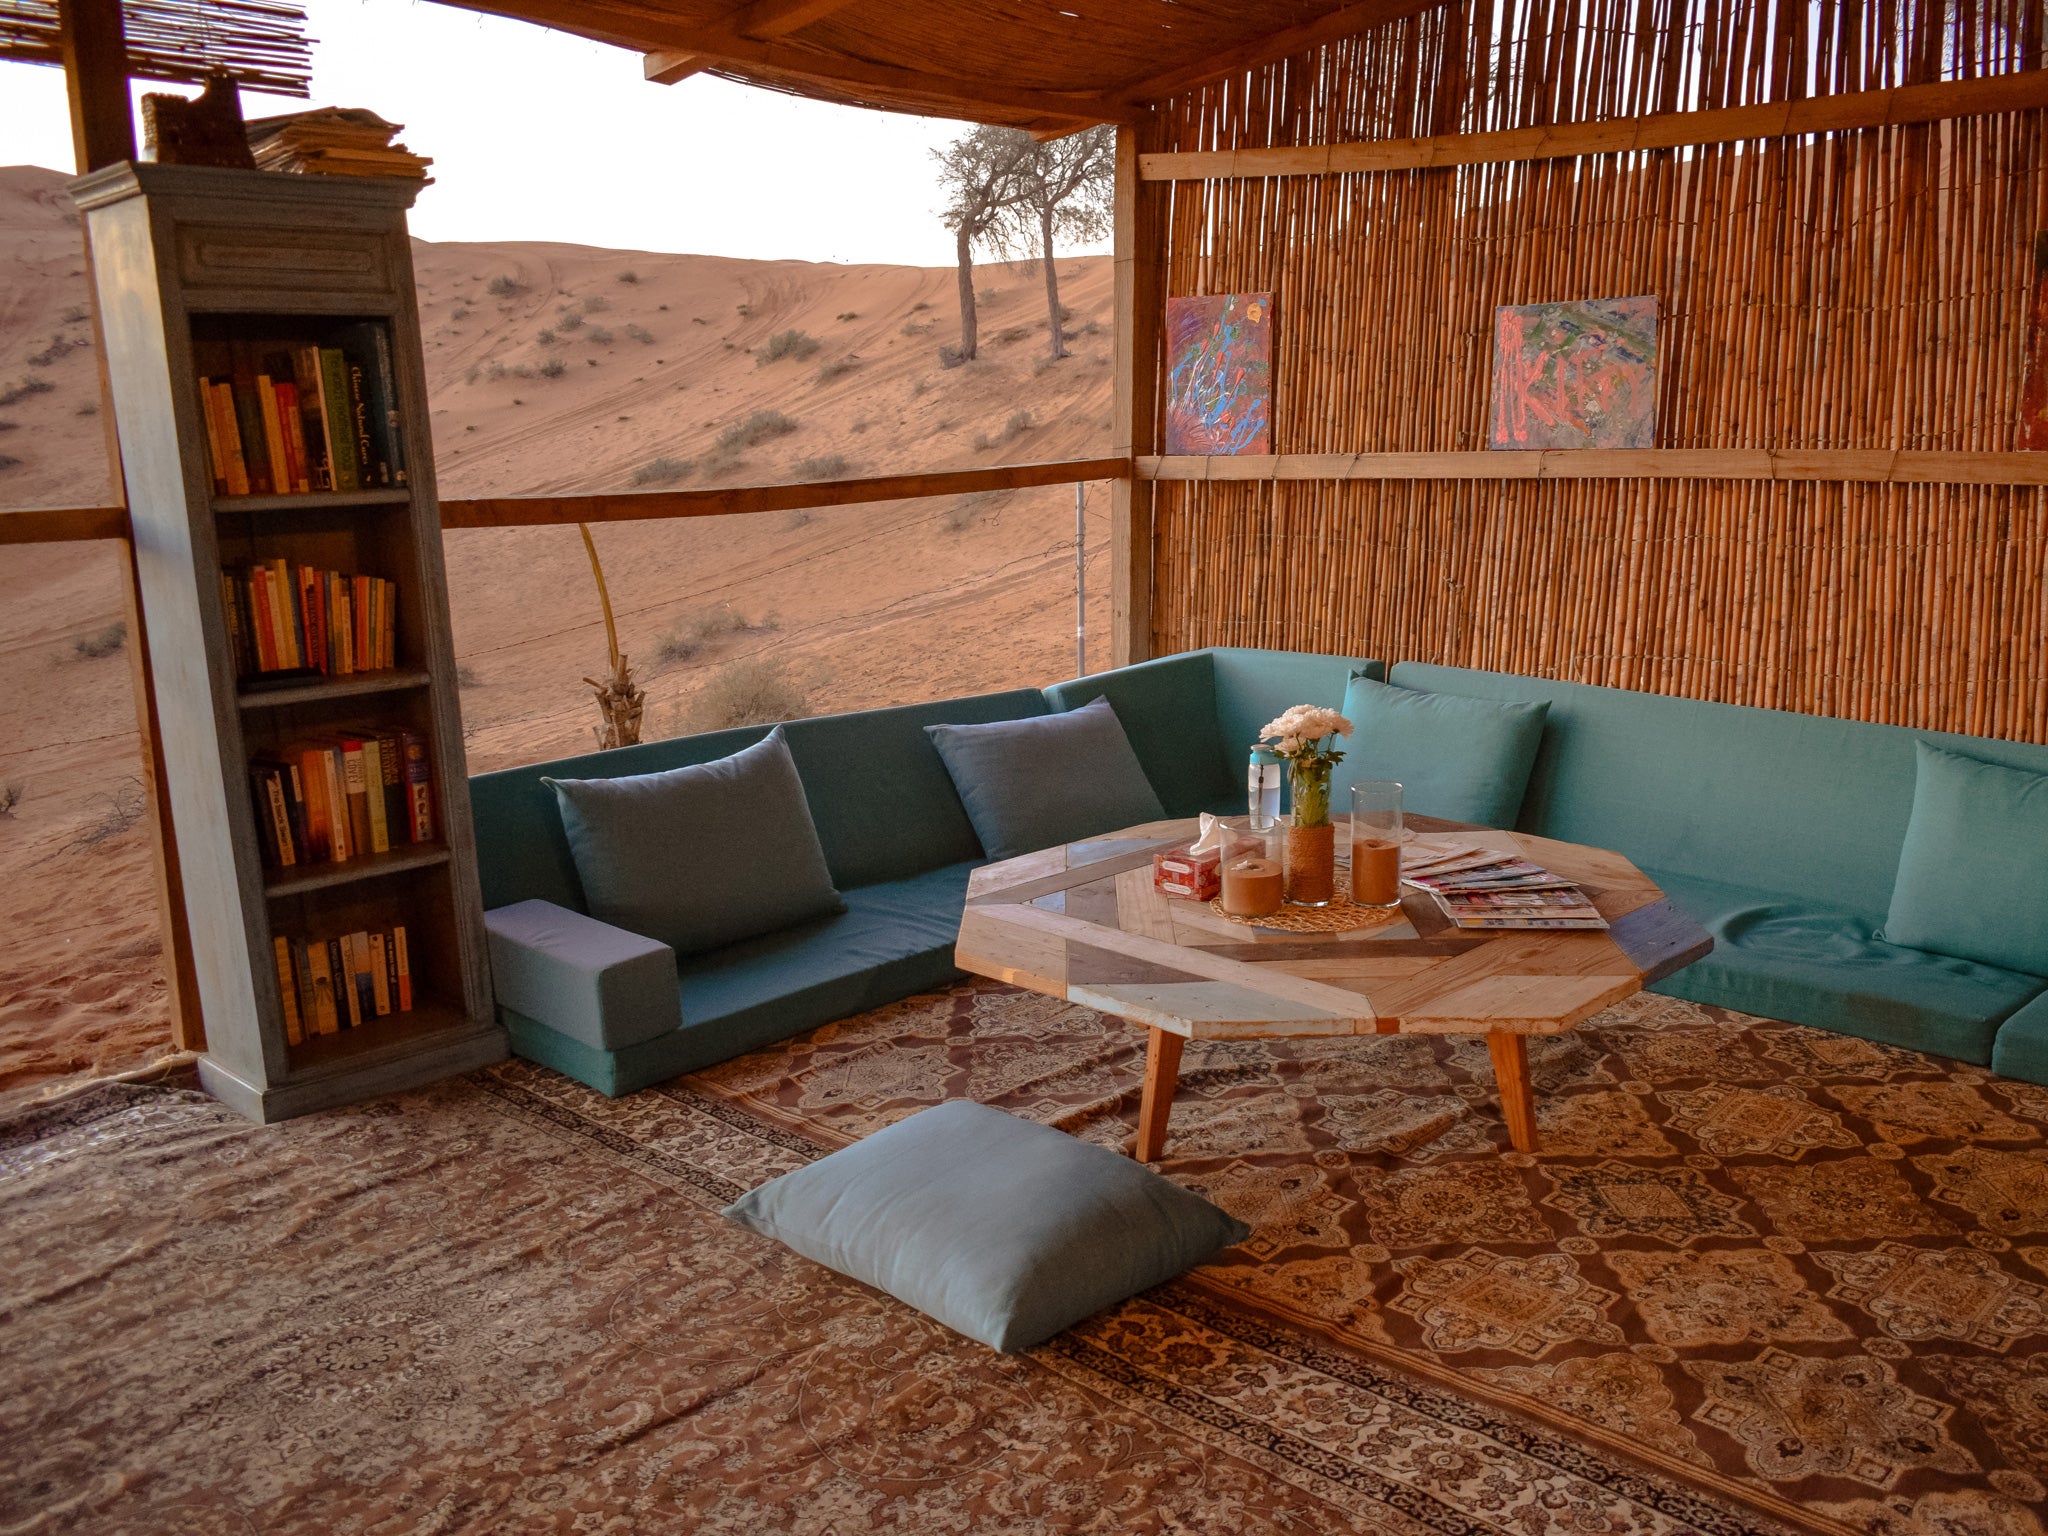 The set-up is designed for rest and relaxation, with books and magazines for guests to read between activities